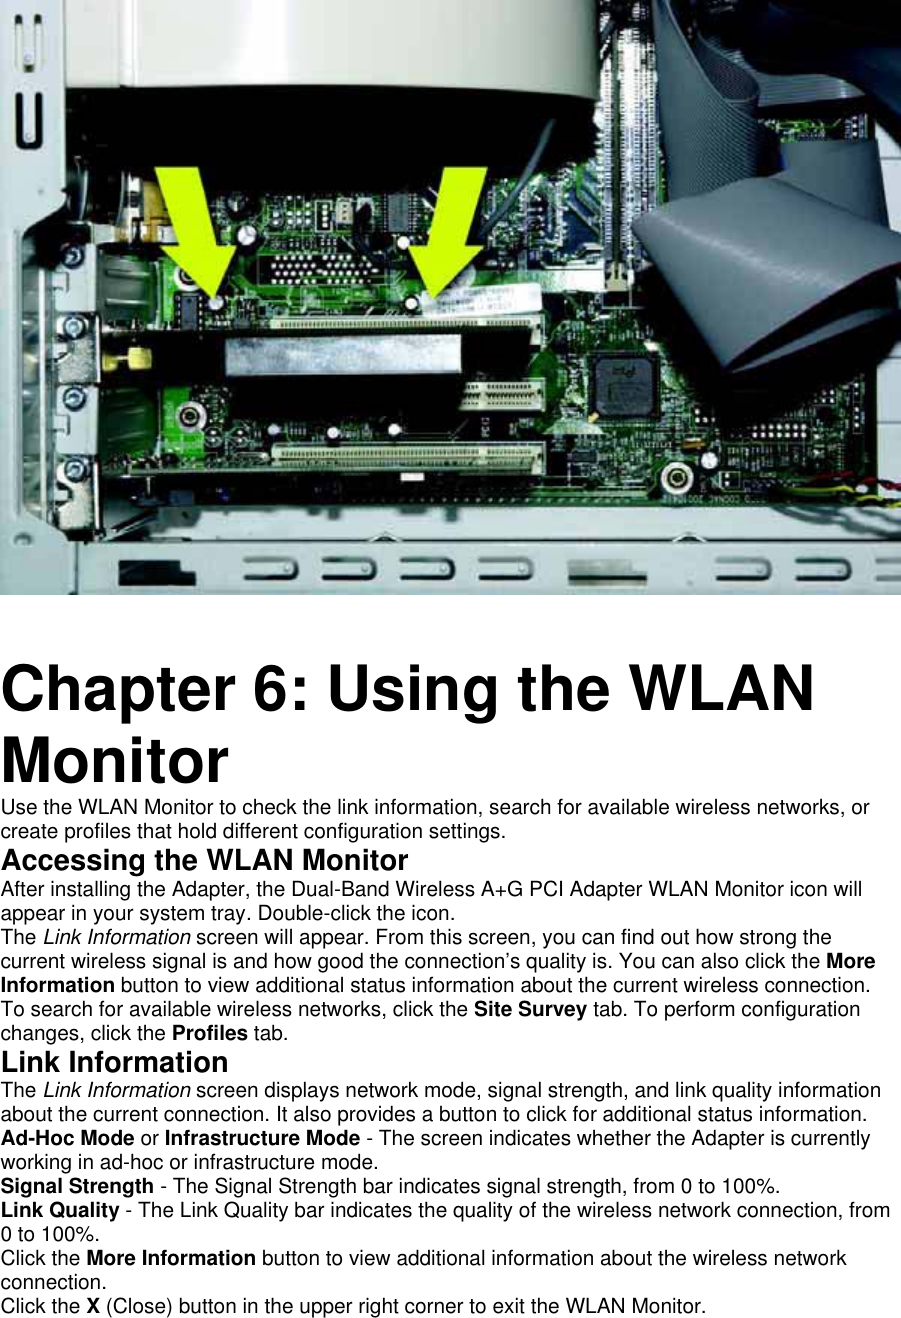         Chapter 6: Using the WLAN Monitor   Use the WLAN Monitor to check the link information, search for available wireless networks, or create profiles that hold different configuration settings.   Accessing the WLAN Monitor   After installing the Adapter, the Dual-Band Wireless A+G PCI Adapter WLAN Monitor icon will appear in your system tray. Double-click the icon.   The Link Information screen will appear. From this screen, you can find out how strong the current wireless signal is and how good the connection’s quality is. You can also click the More Information button to view additional status information about the current wireless connection. To search for available wireless networks, click the Site Survey tab. To perform configuration changes, click the Profiles tab.  Link Information   The Link Information screen displays network mode, signal strength, and link quality information about the current connection. It also provides a button to click for additional status information.   Ad-Hoc Mode or Infrastructure Mode - The screen indicates whether the Adapter is currently working in ad-hoc or infrastructure mode.   Signal Strength - The Signal Strength bar indicates signal strength, from 0 to 100%.   Link Quality - The Link Quality bar indicates the quality of the wireless network connection, from 0 to 100%.   Click the More Information button to view additional information about the wireless network connection.  Click the X (Close) button in the upper right corner to exit the WLAN Monitor.  